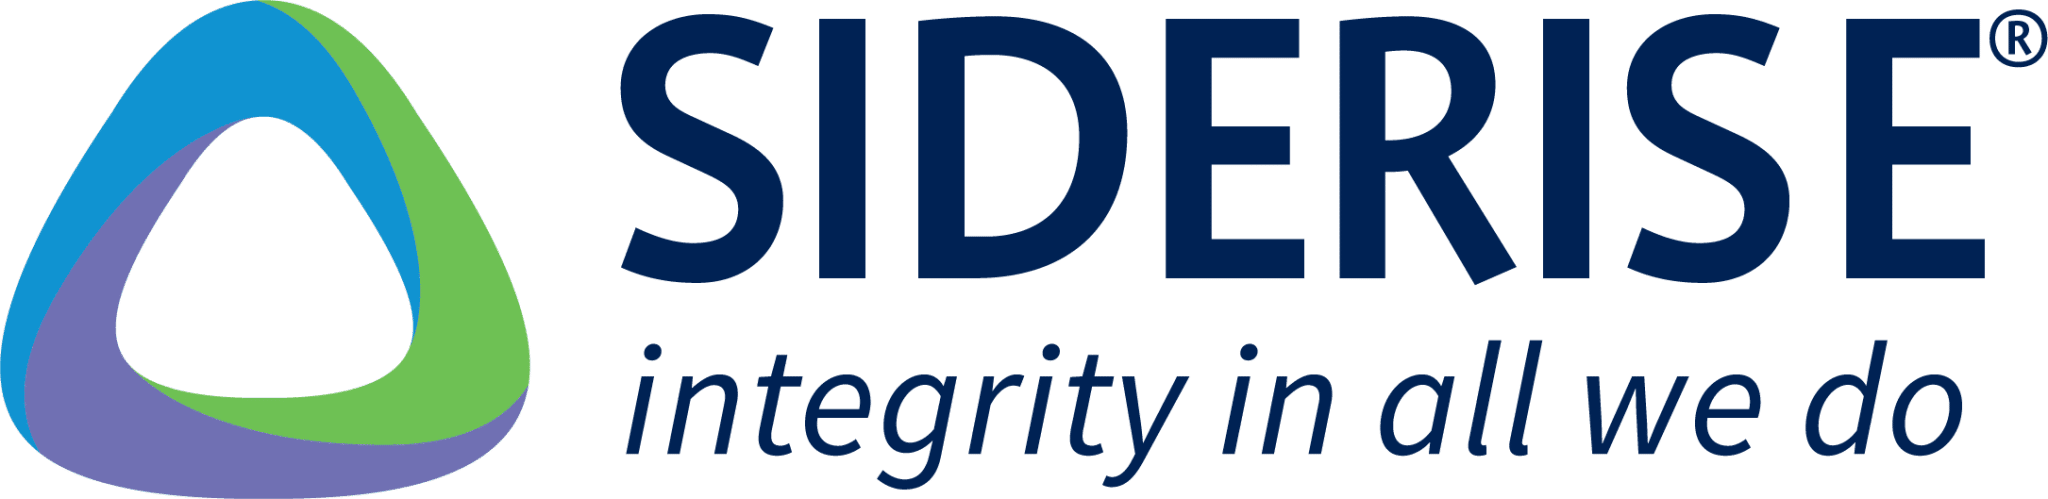 Siderise logo reading "Siderise: integrity in all we do"